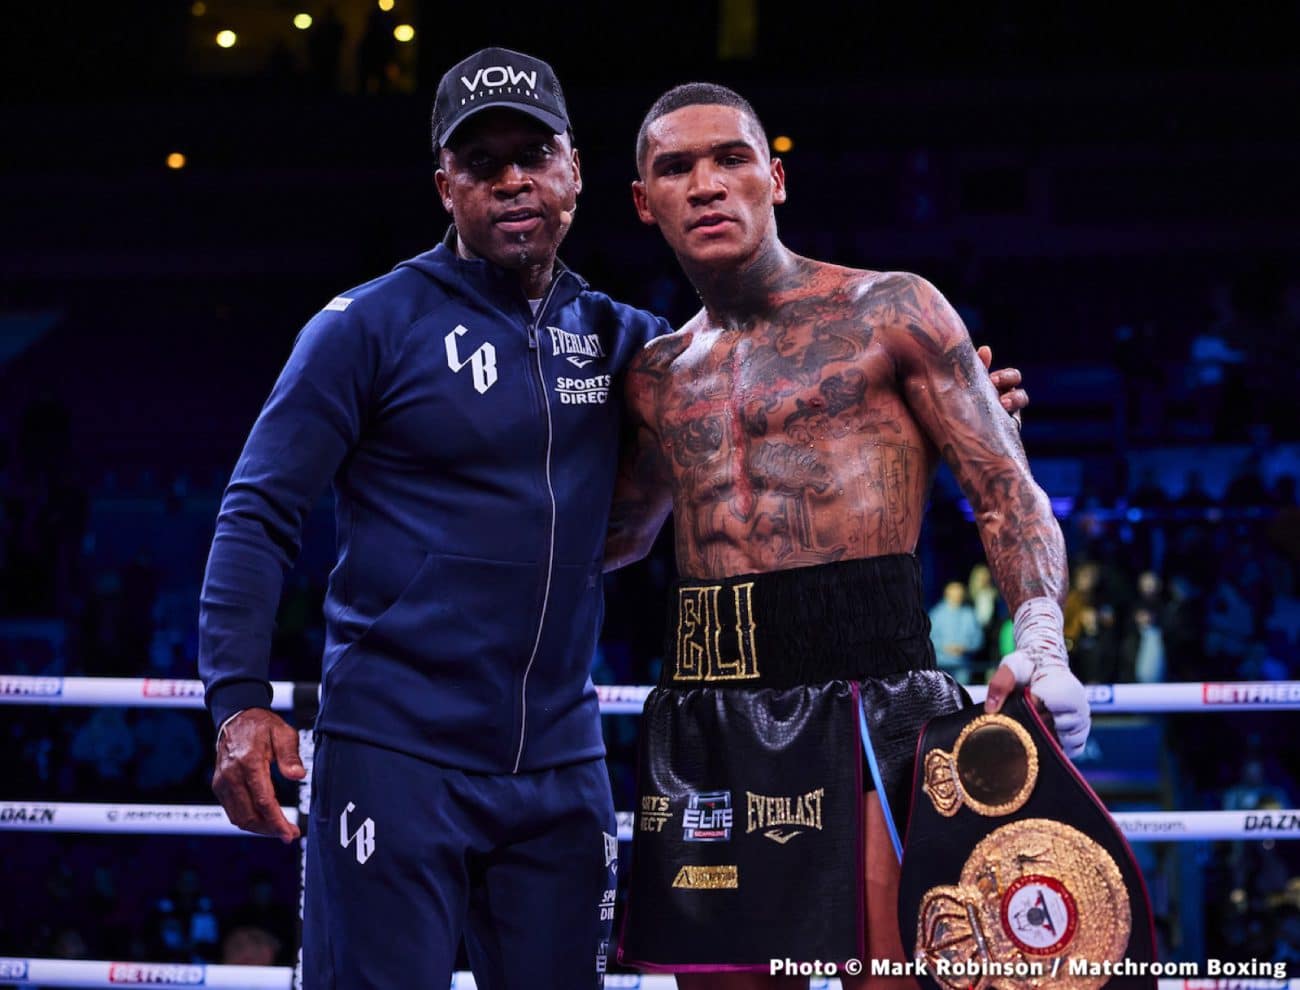 Image: Conor Benn Wants To Fight Kell Brook Next and Thinks He Can Beat Him